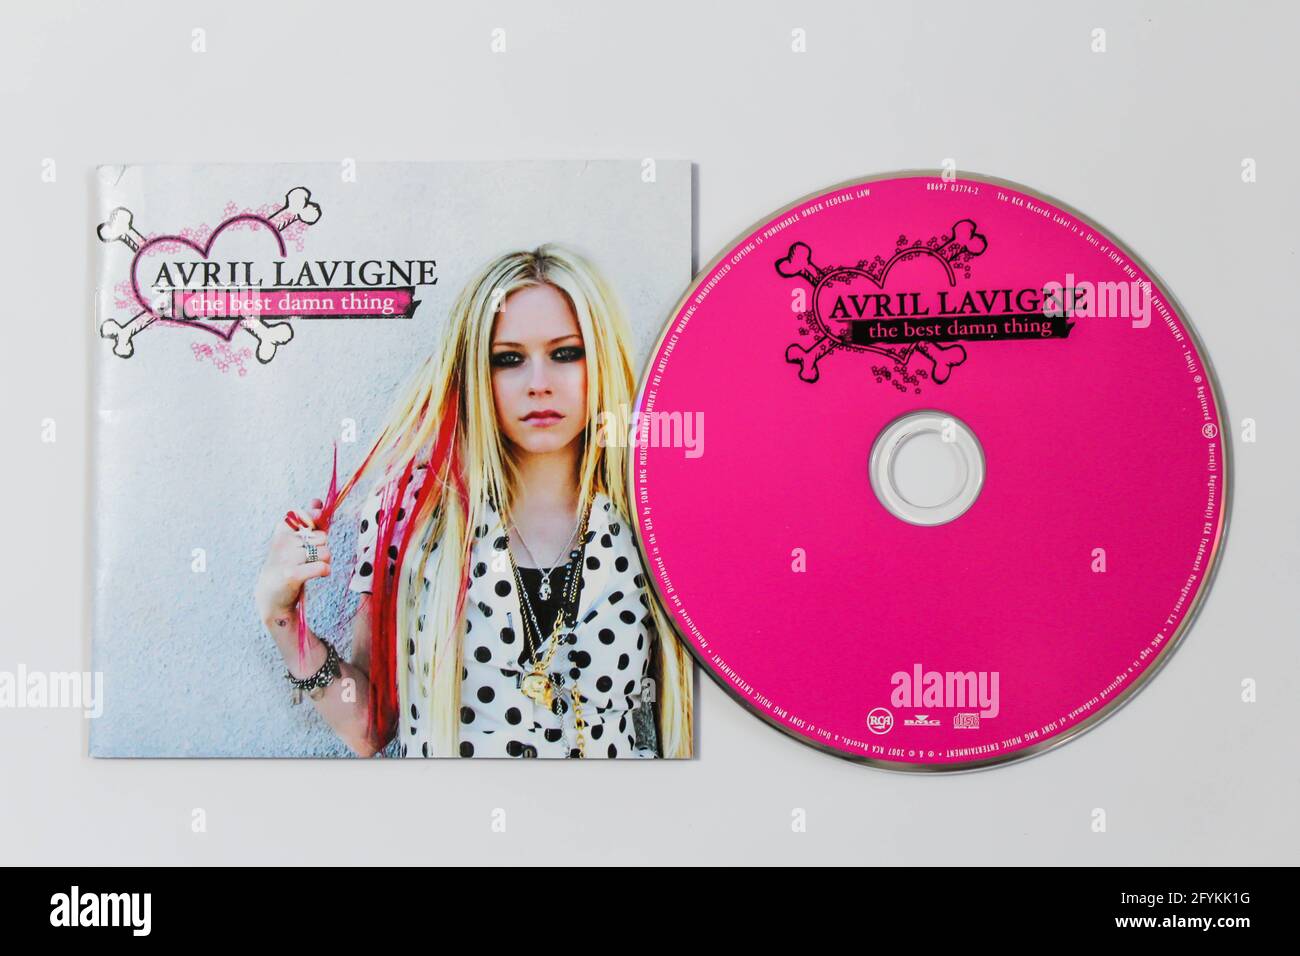 The Best Damn Thing is the third studio album by Canadian singer Avril Lavigne. CD album disc titled The Best Damn Thing album cover Stock Photo